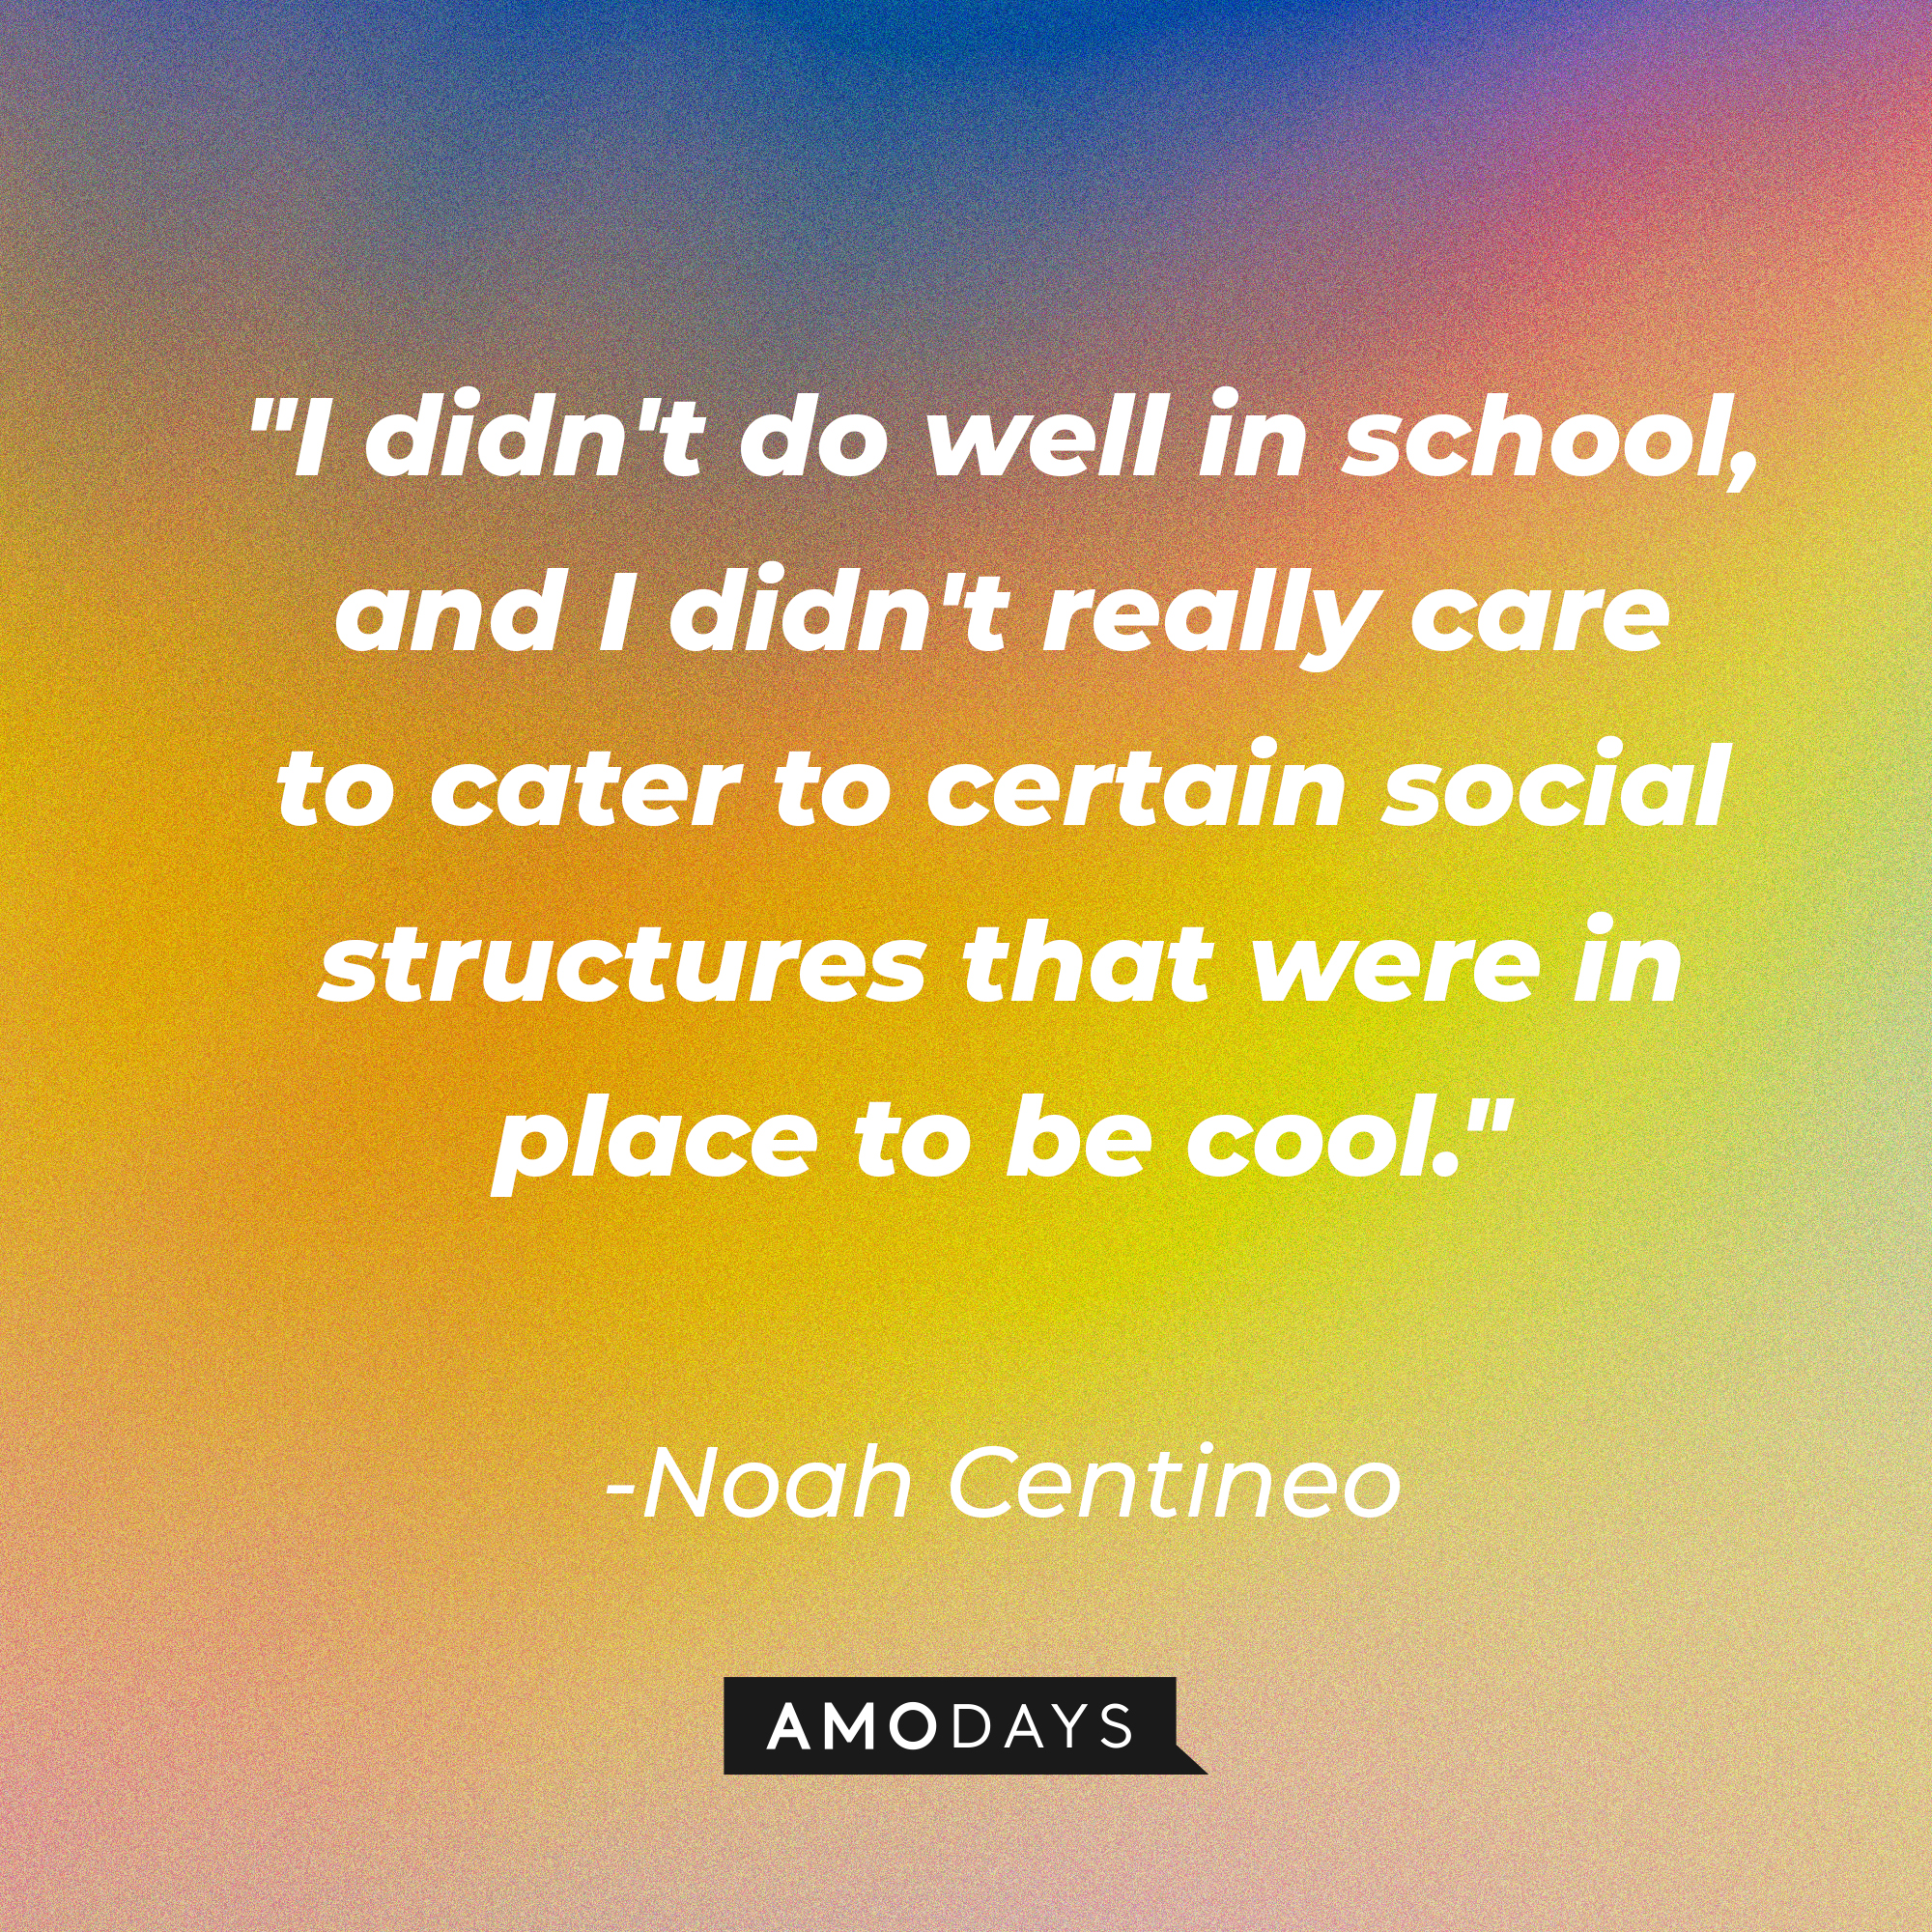 Noah Centineo's quote: "I didn't do well in school, and I didn't really care to cater to certain social structures that were in place to be cool." | Image: AmoDays